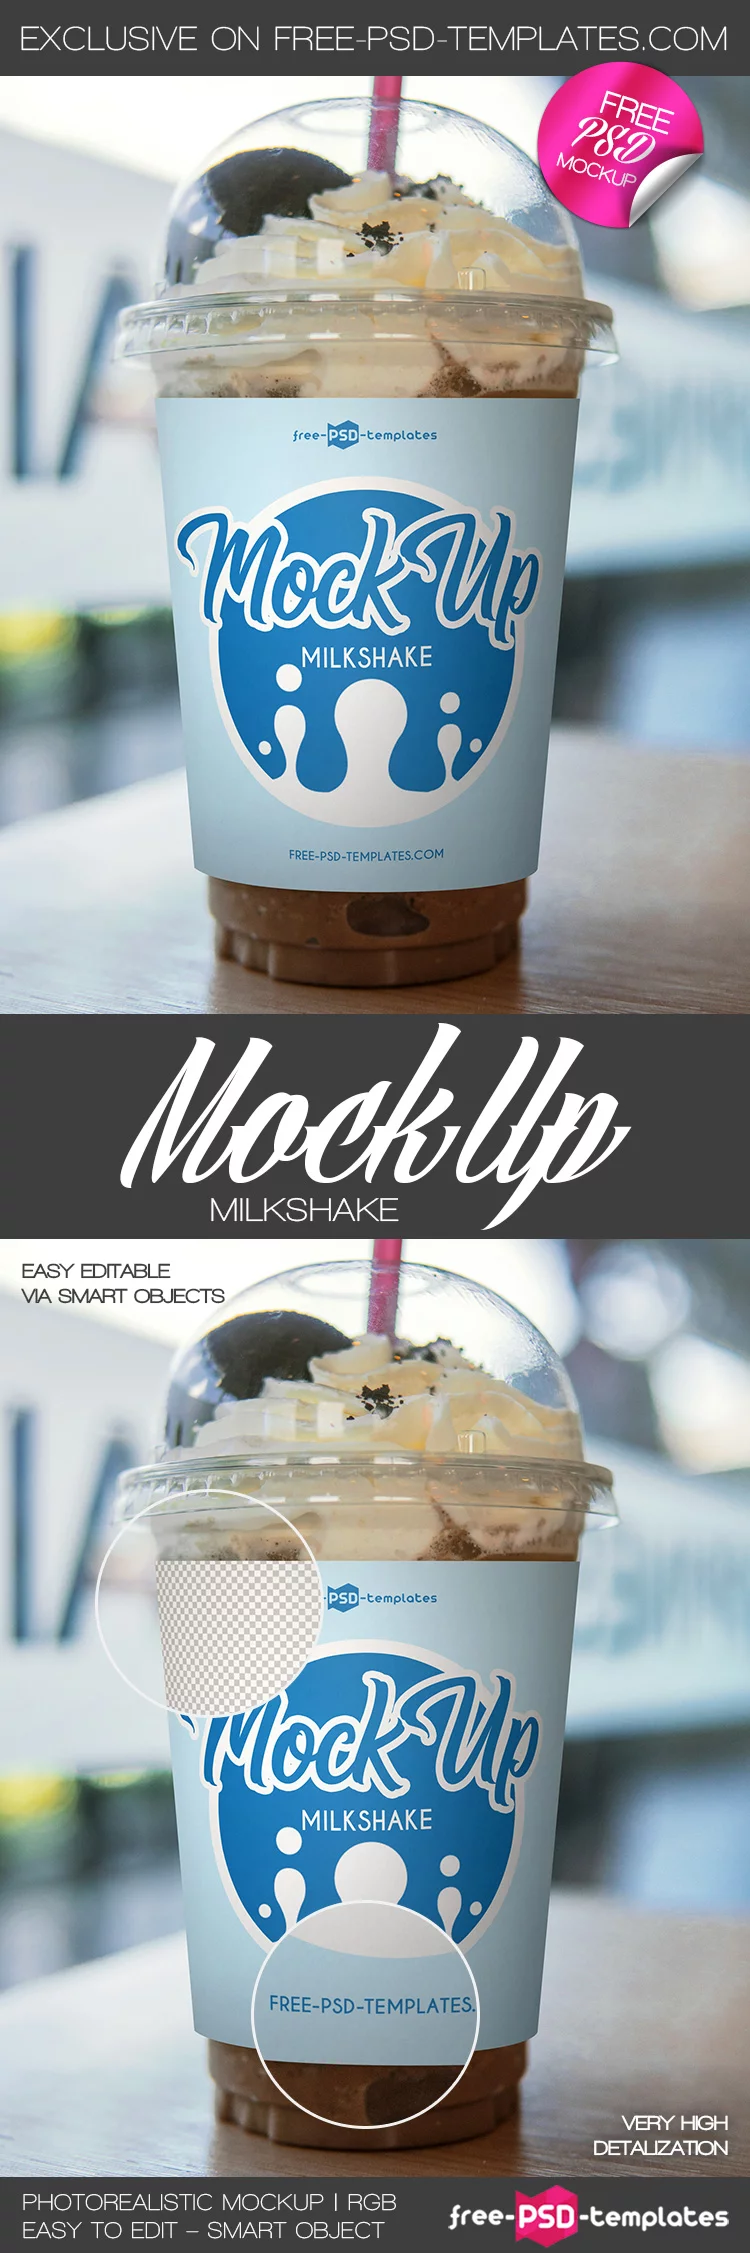 https://free-psd-templates.com/wp-content/uploads/2019/02/Preview_one_1_free-milkshake-mock-up-in-psd.webp